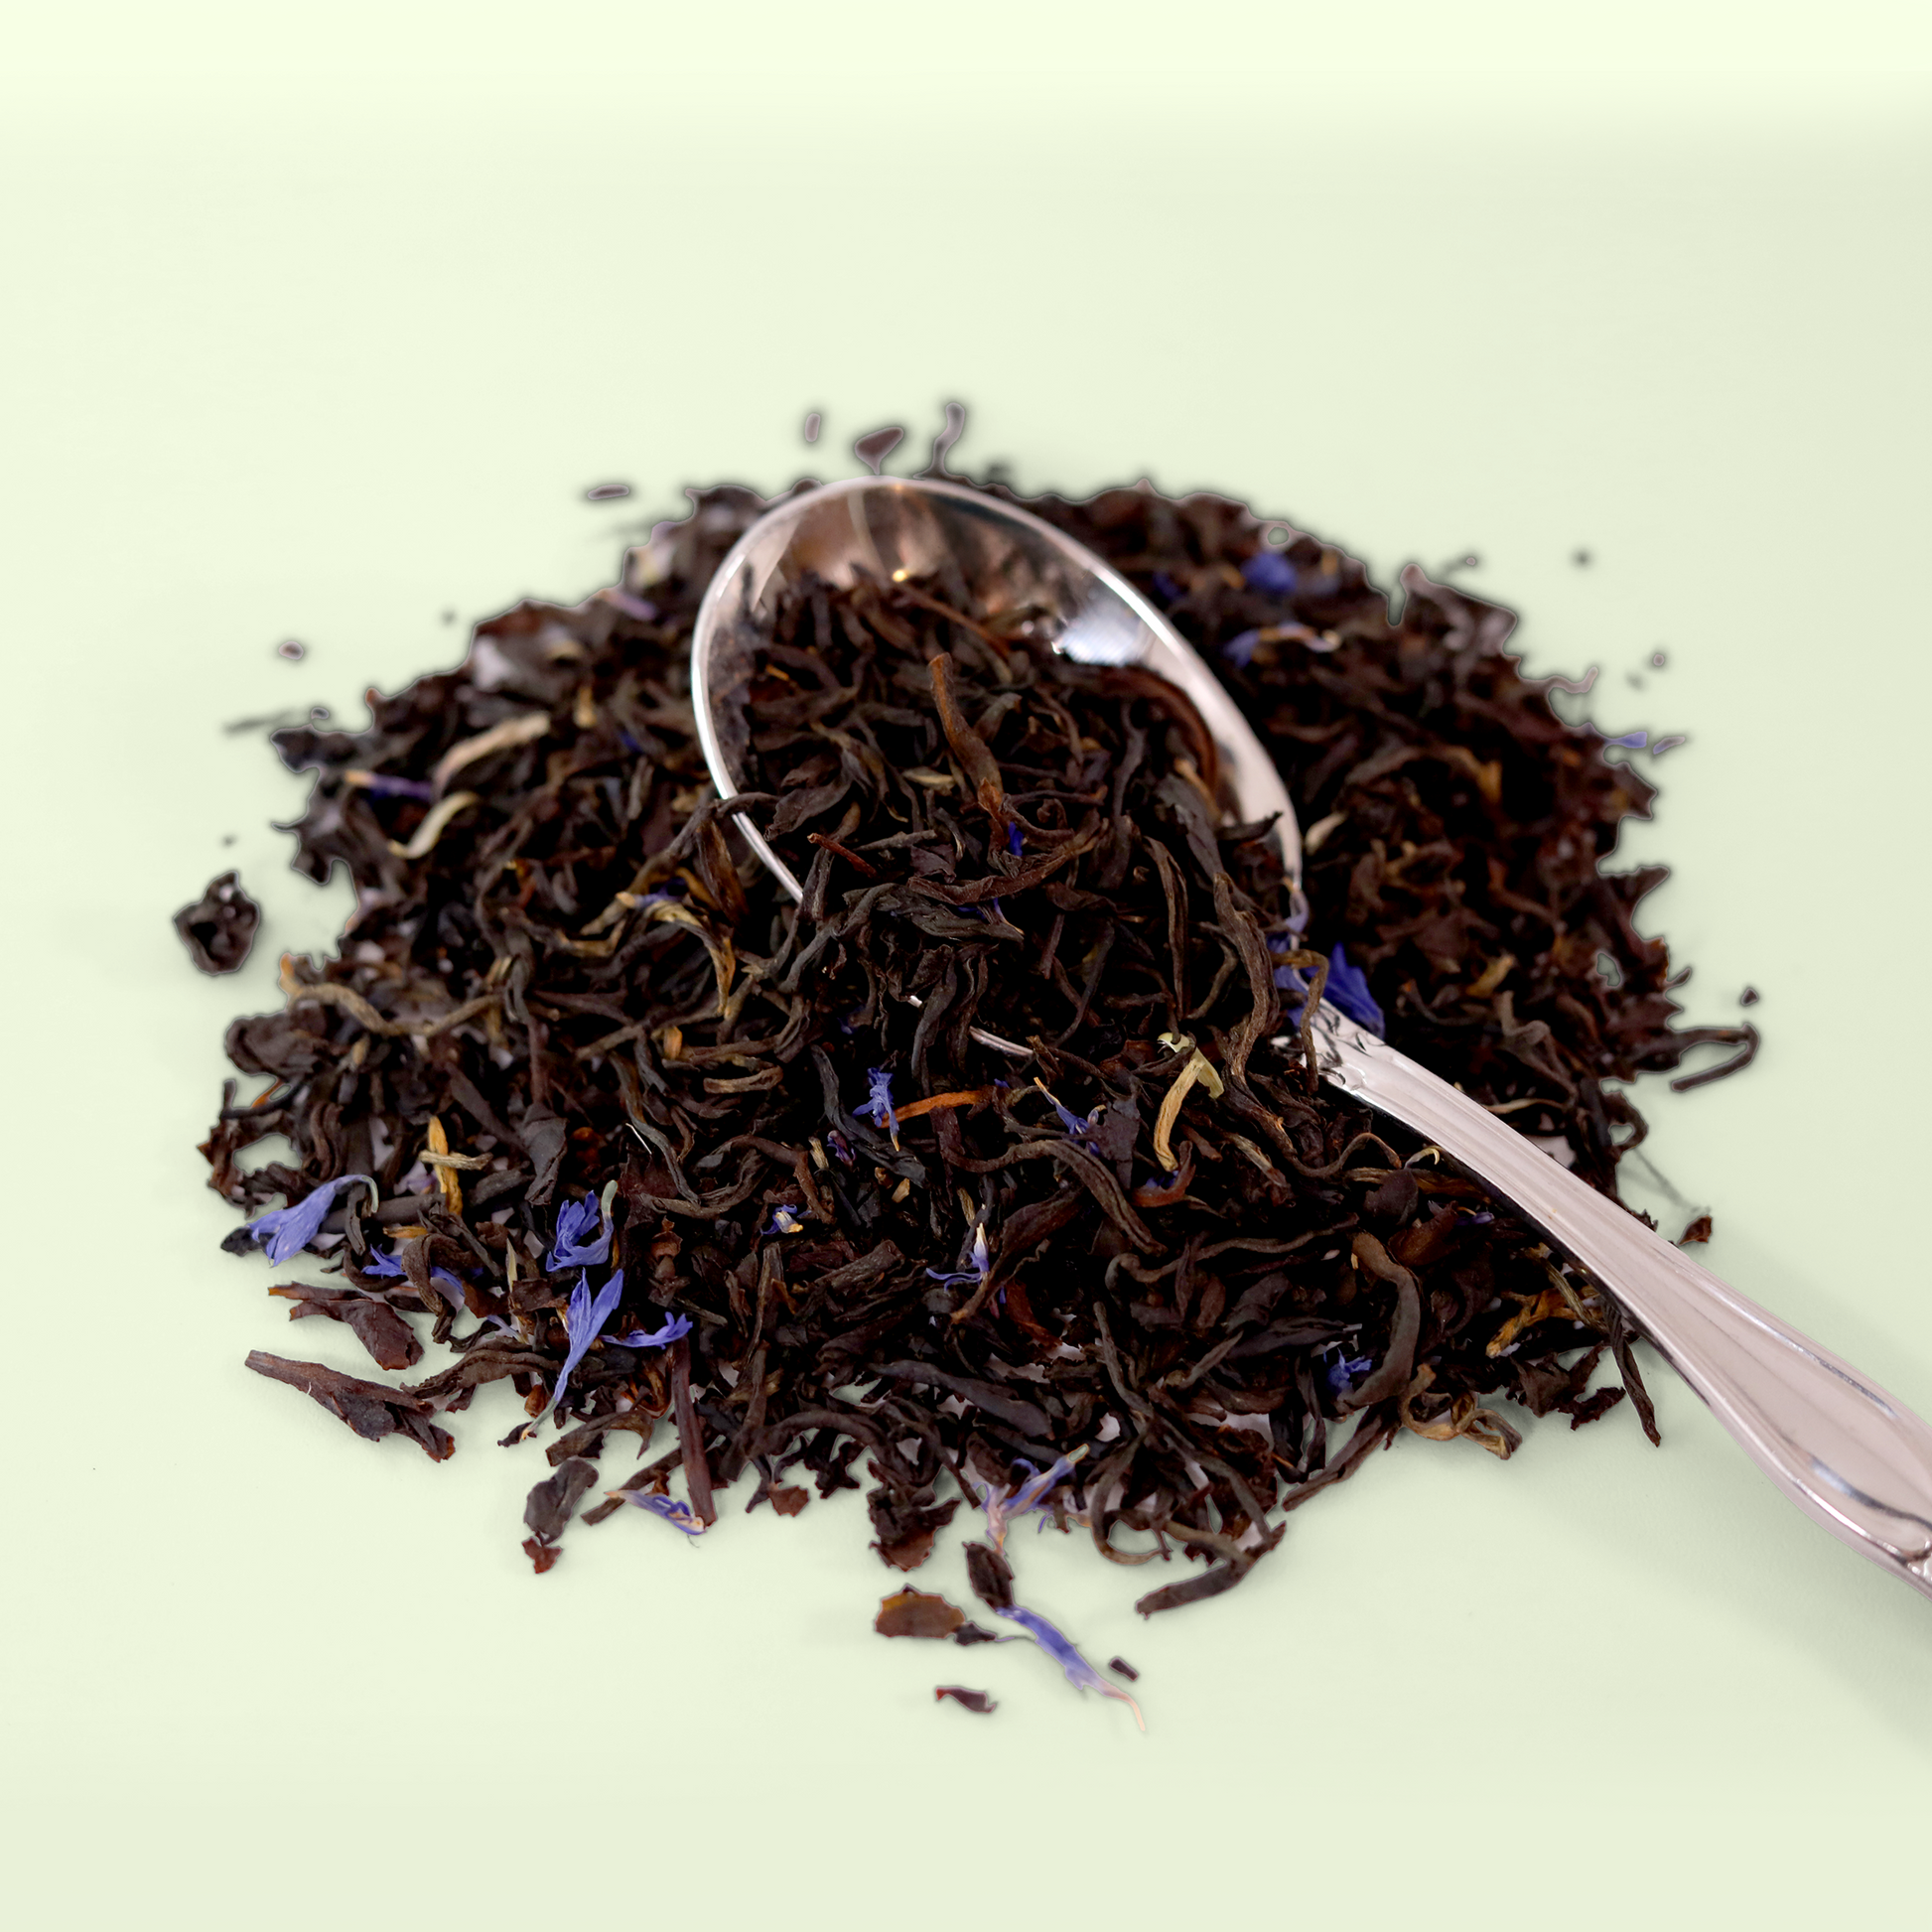  A close-up view of a pile of dried Blue Fields Earl Grey tea leaves. A metal spoon is visible, scooping up some of the tea blend. A Good Store product.